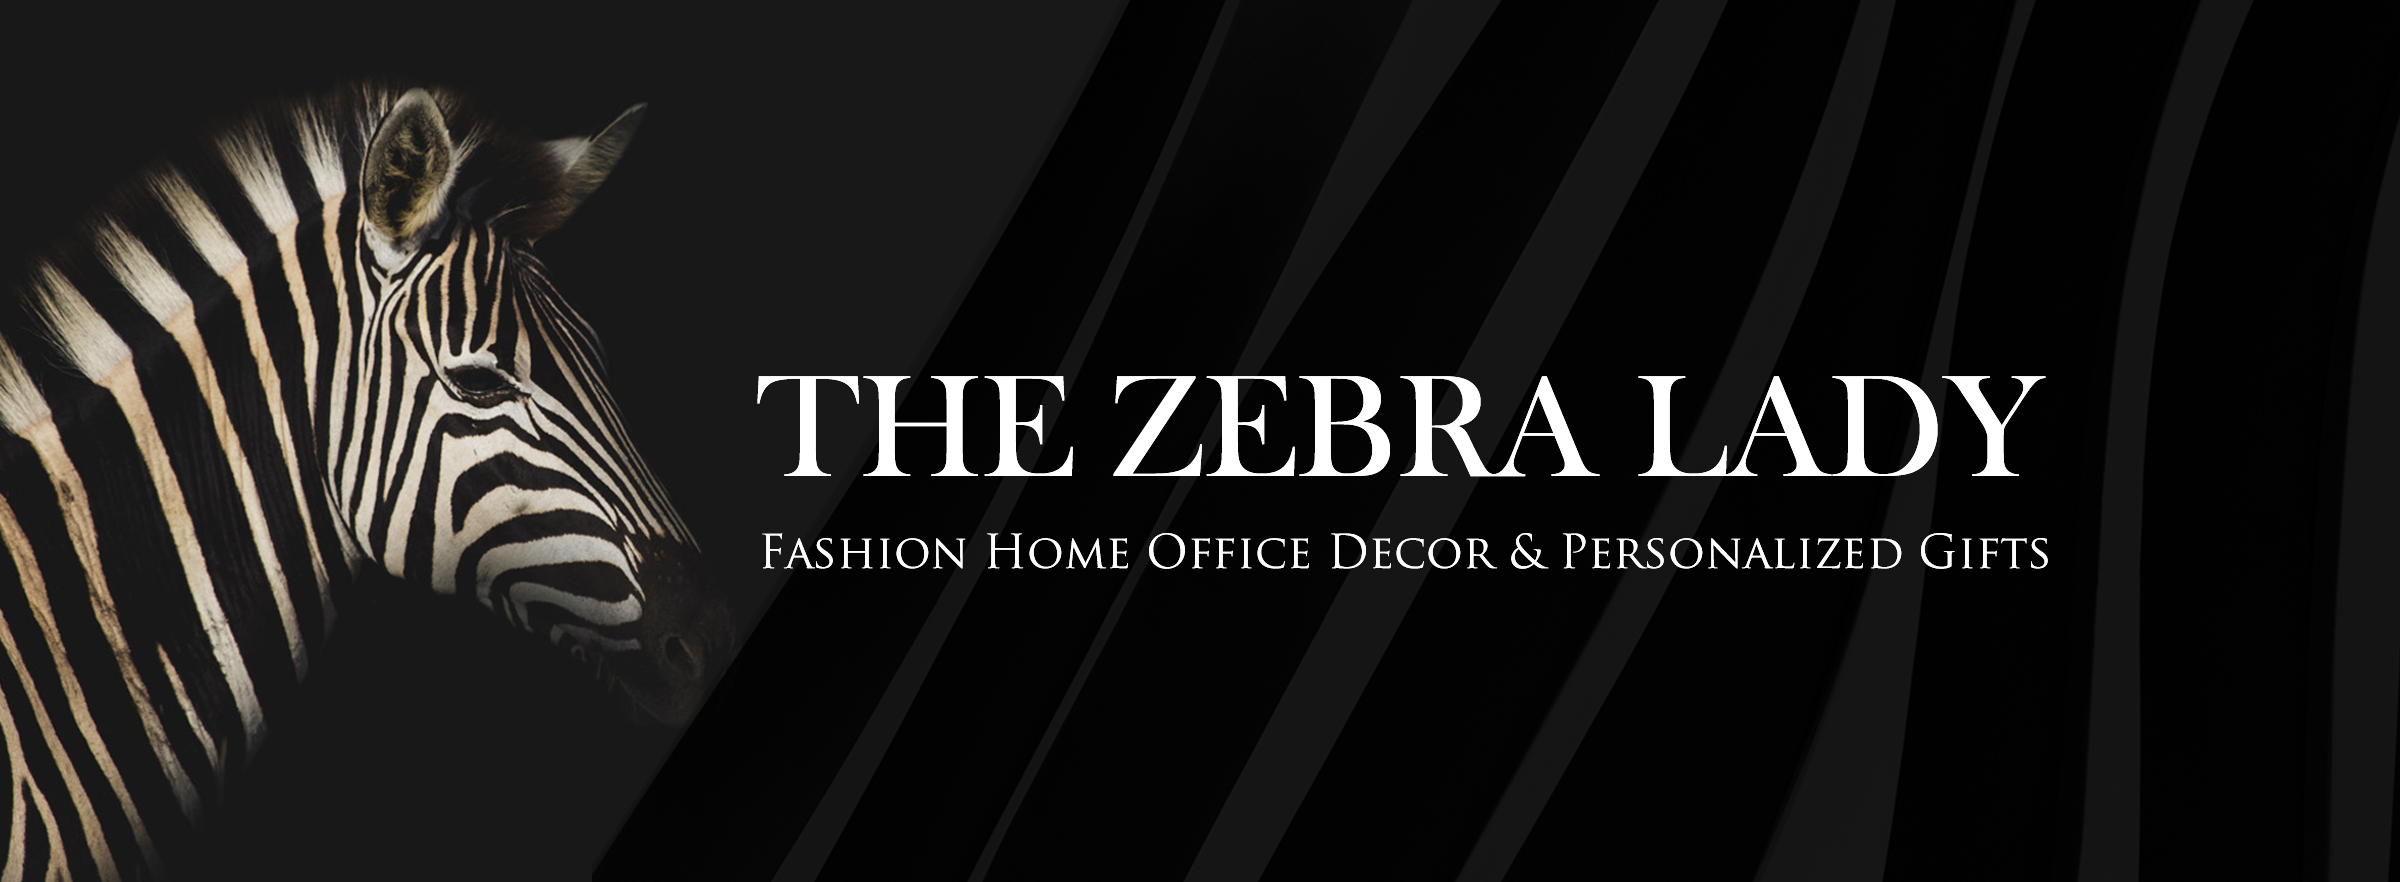 the zebra lady site banner slide 12 may 2019.png